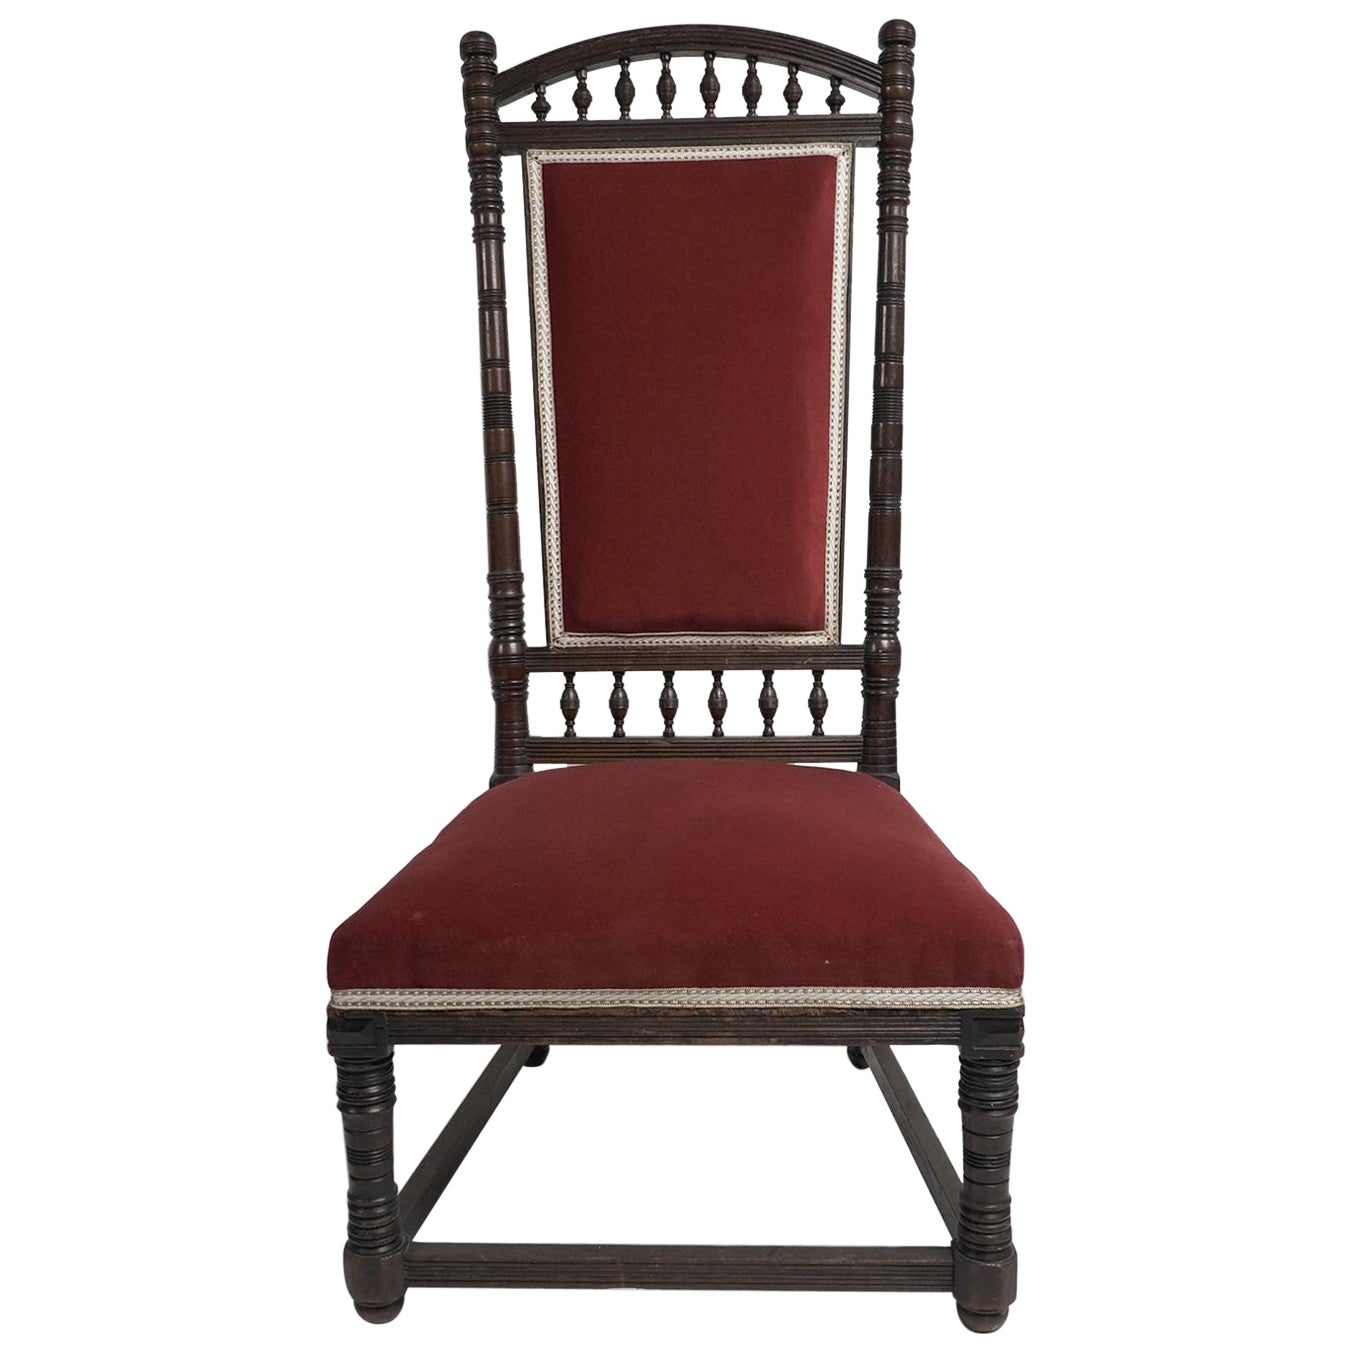 Thomas Edward Collcutt for Collinson & Lock. A fine Aesthetic Movement Walnut high back chair with later maroon upholstery. Illustrated in the Collinson and Lock catalog.
